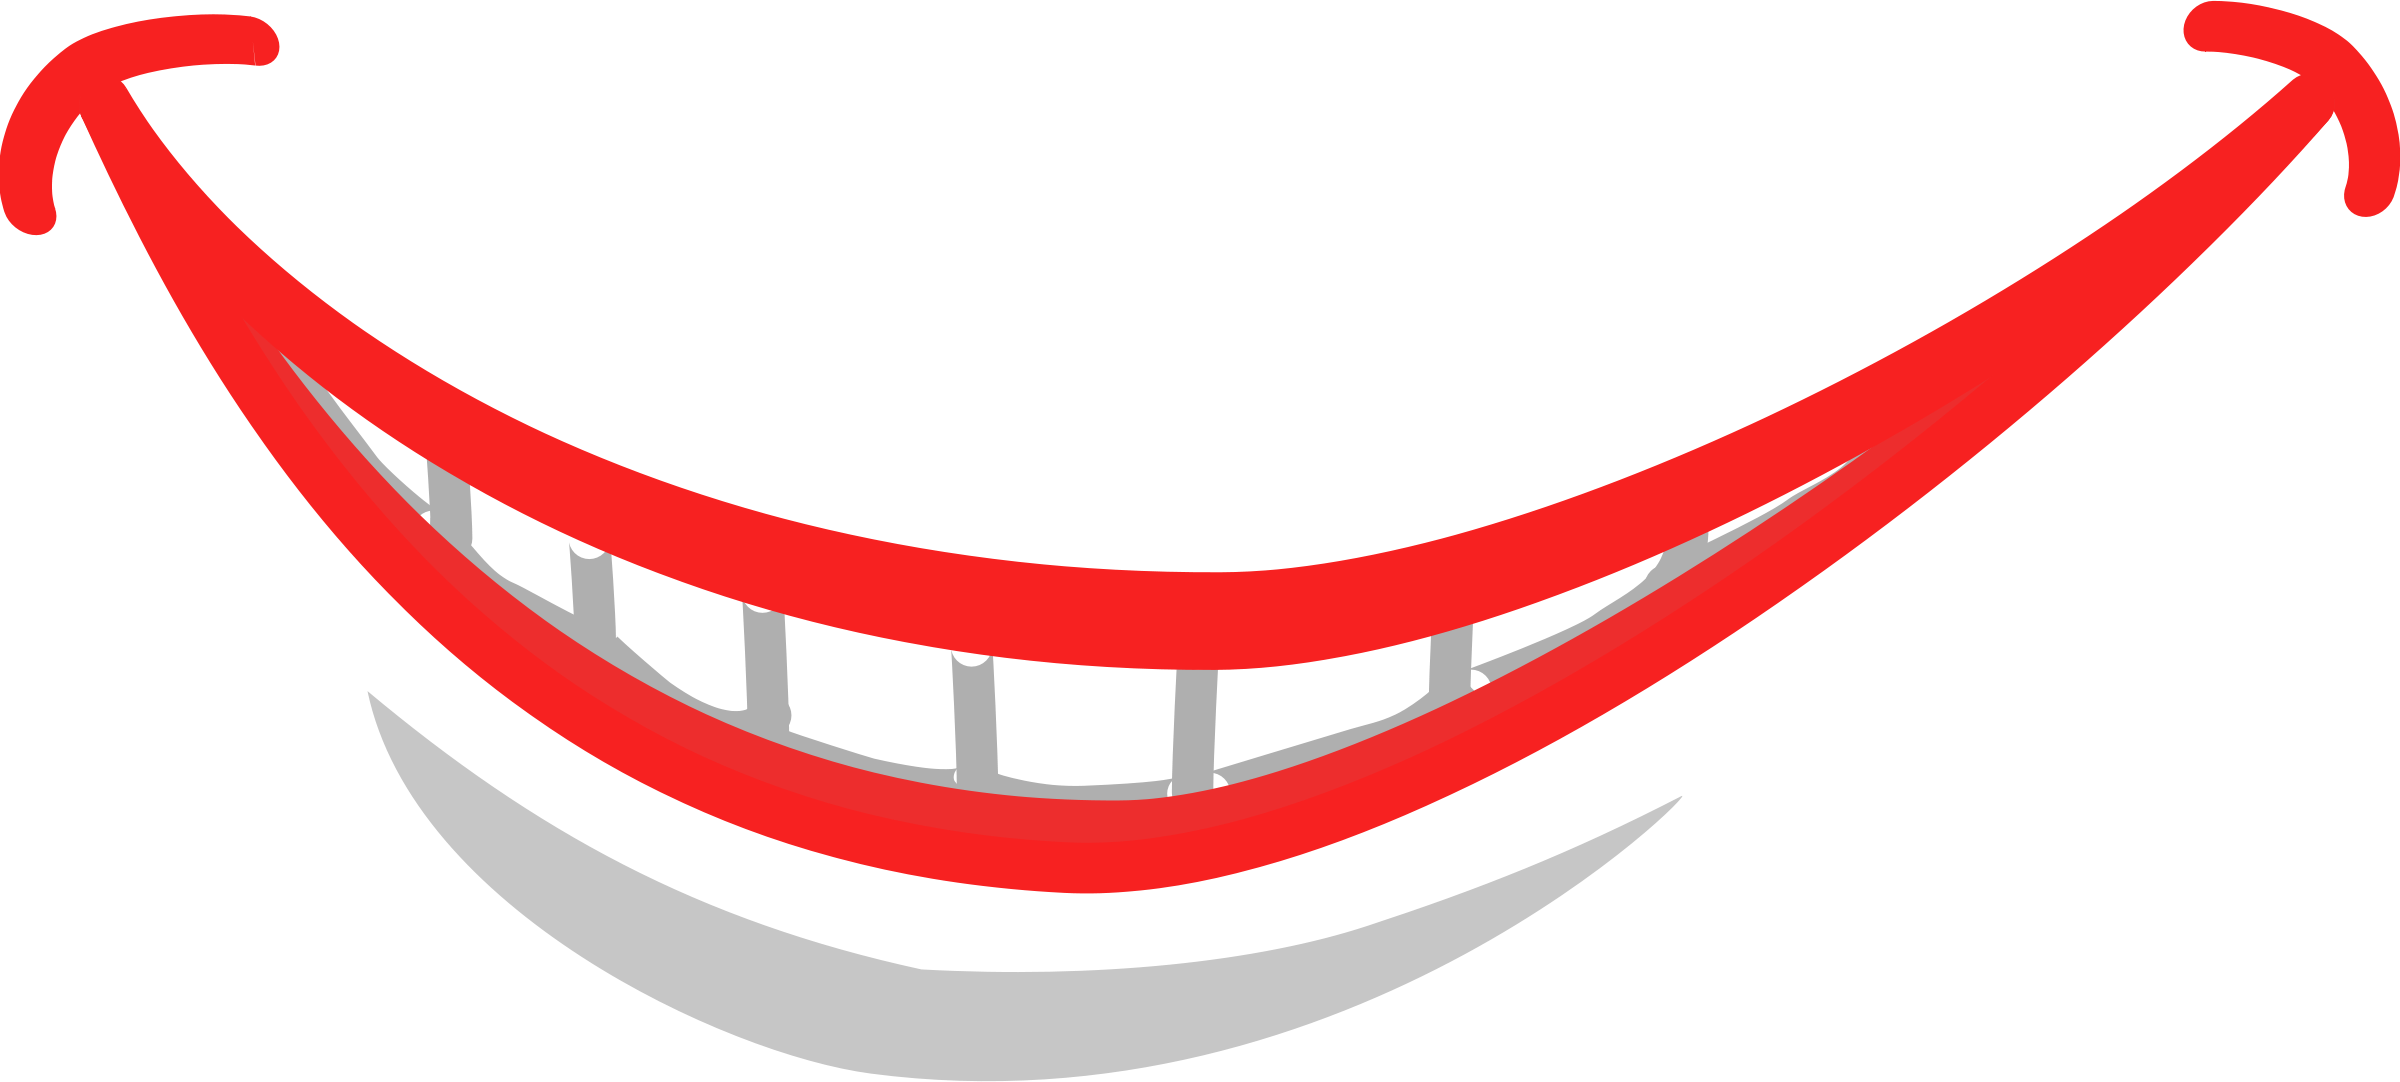 Cartoon Mouth Smile - ClipArt Best